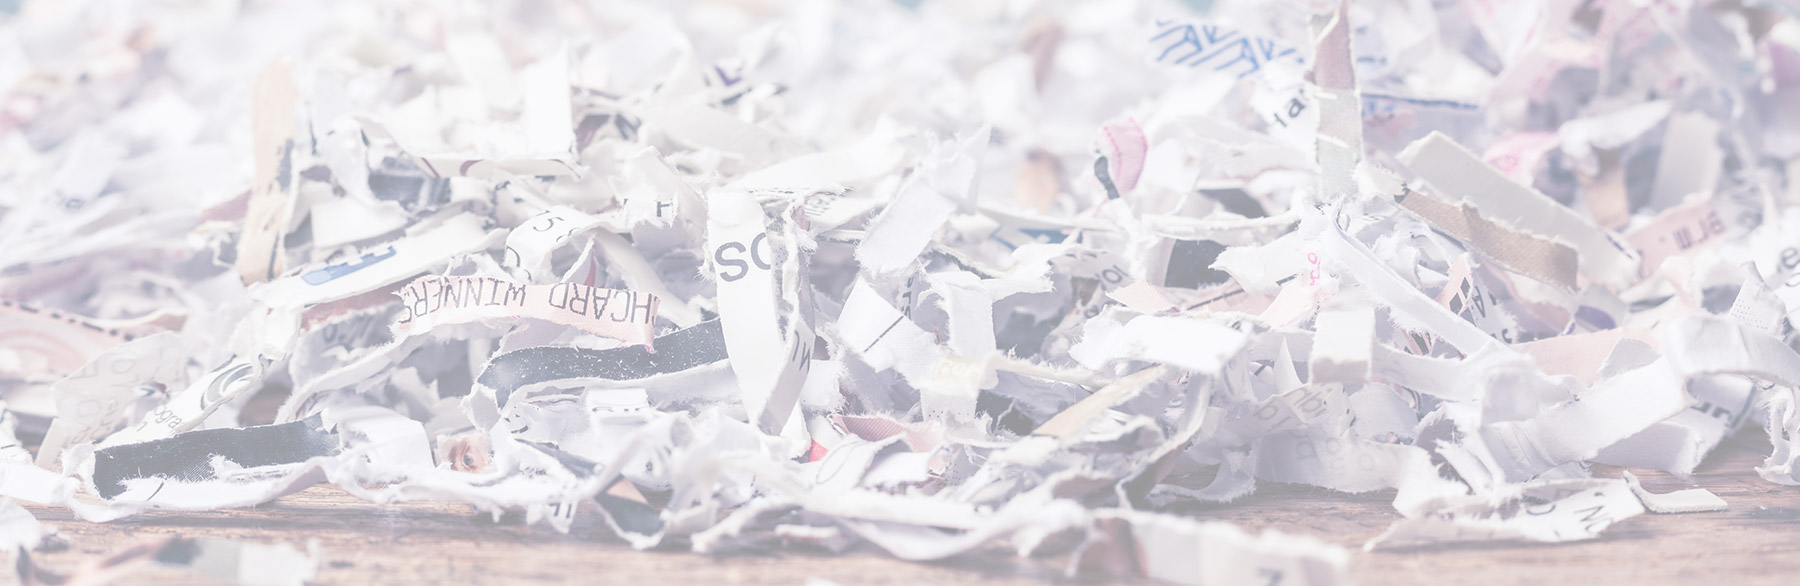 Shredding Service In Tulsa Perfection In Every Way